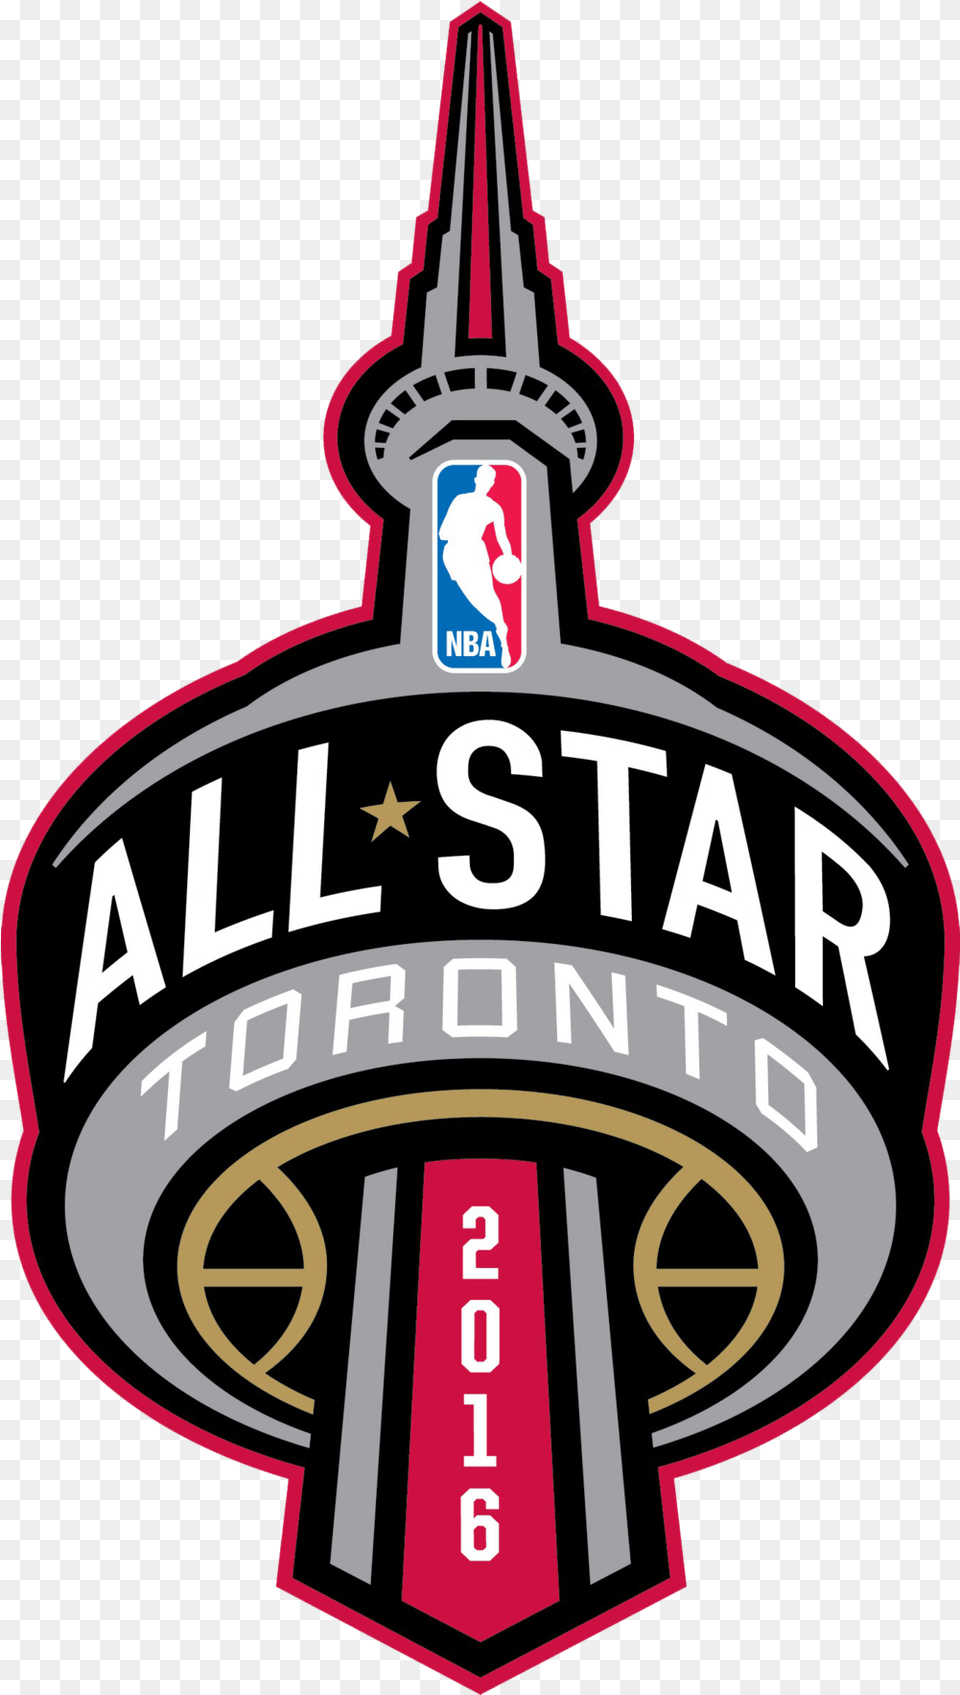 Nba All Star Weekend Logopedia Fandom 2016 Nba All Star Game Toronto Logo, Architecture, Building, Spire, Tower Free Png